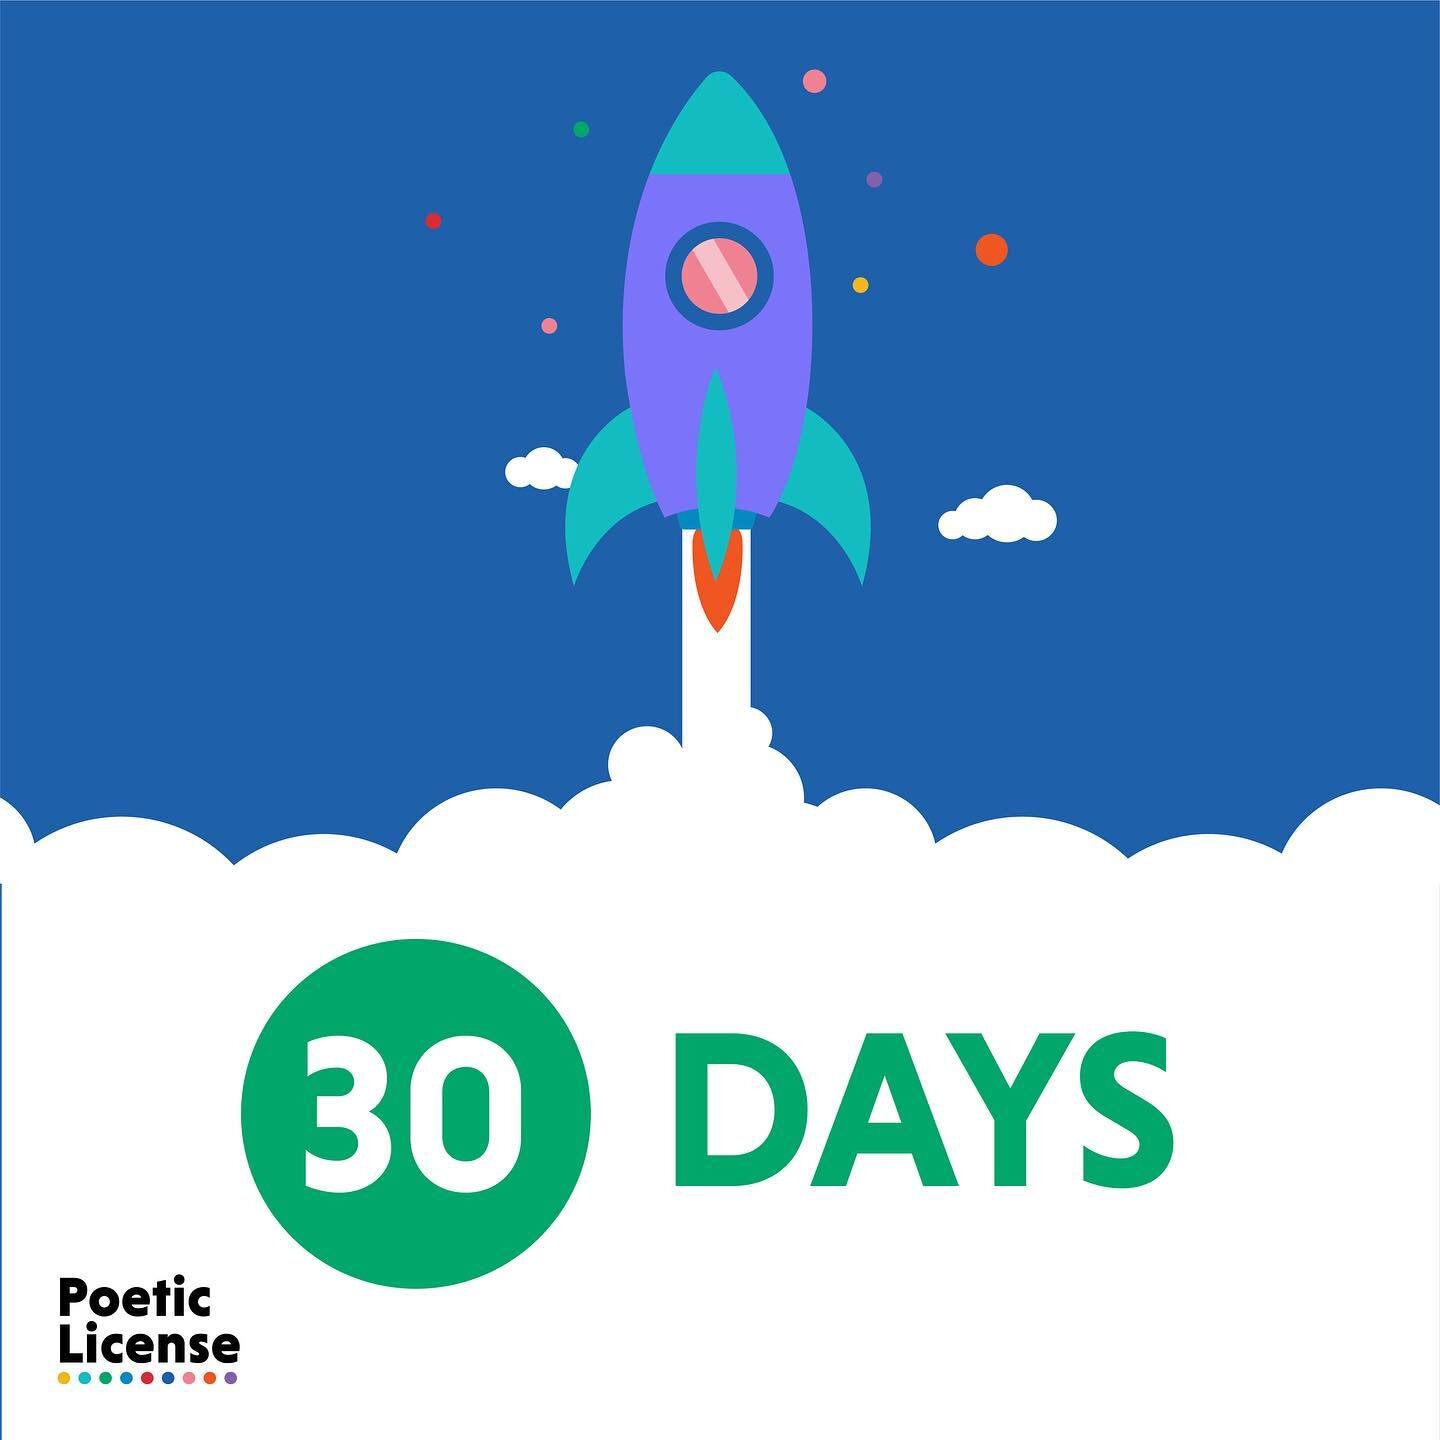 There are only THIRTY days left until Poetic License launches on Kickstarter! Click the link in our bio to visit our pre-launch page.
&bull;
#kickstarter #kickstartercampaign #kickstarterproject #crowdfunding #crowdfundingcampaign #poeticlicense #boa